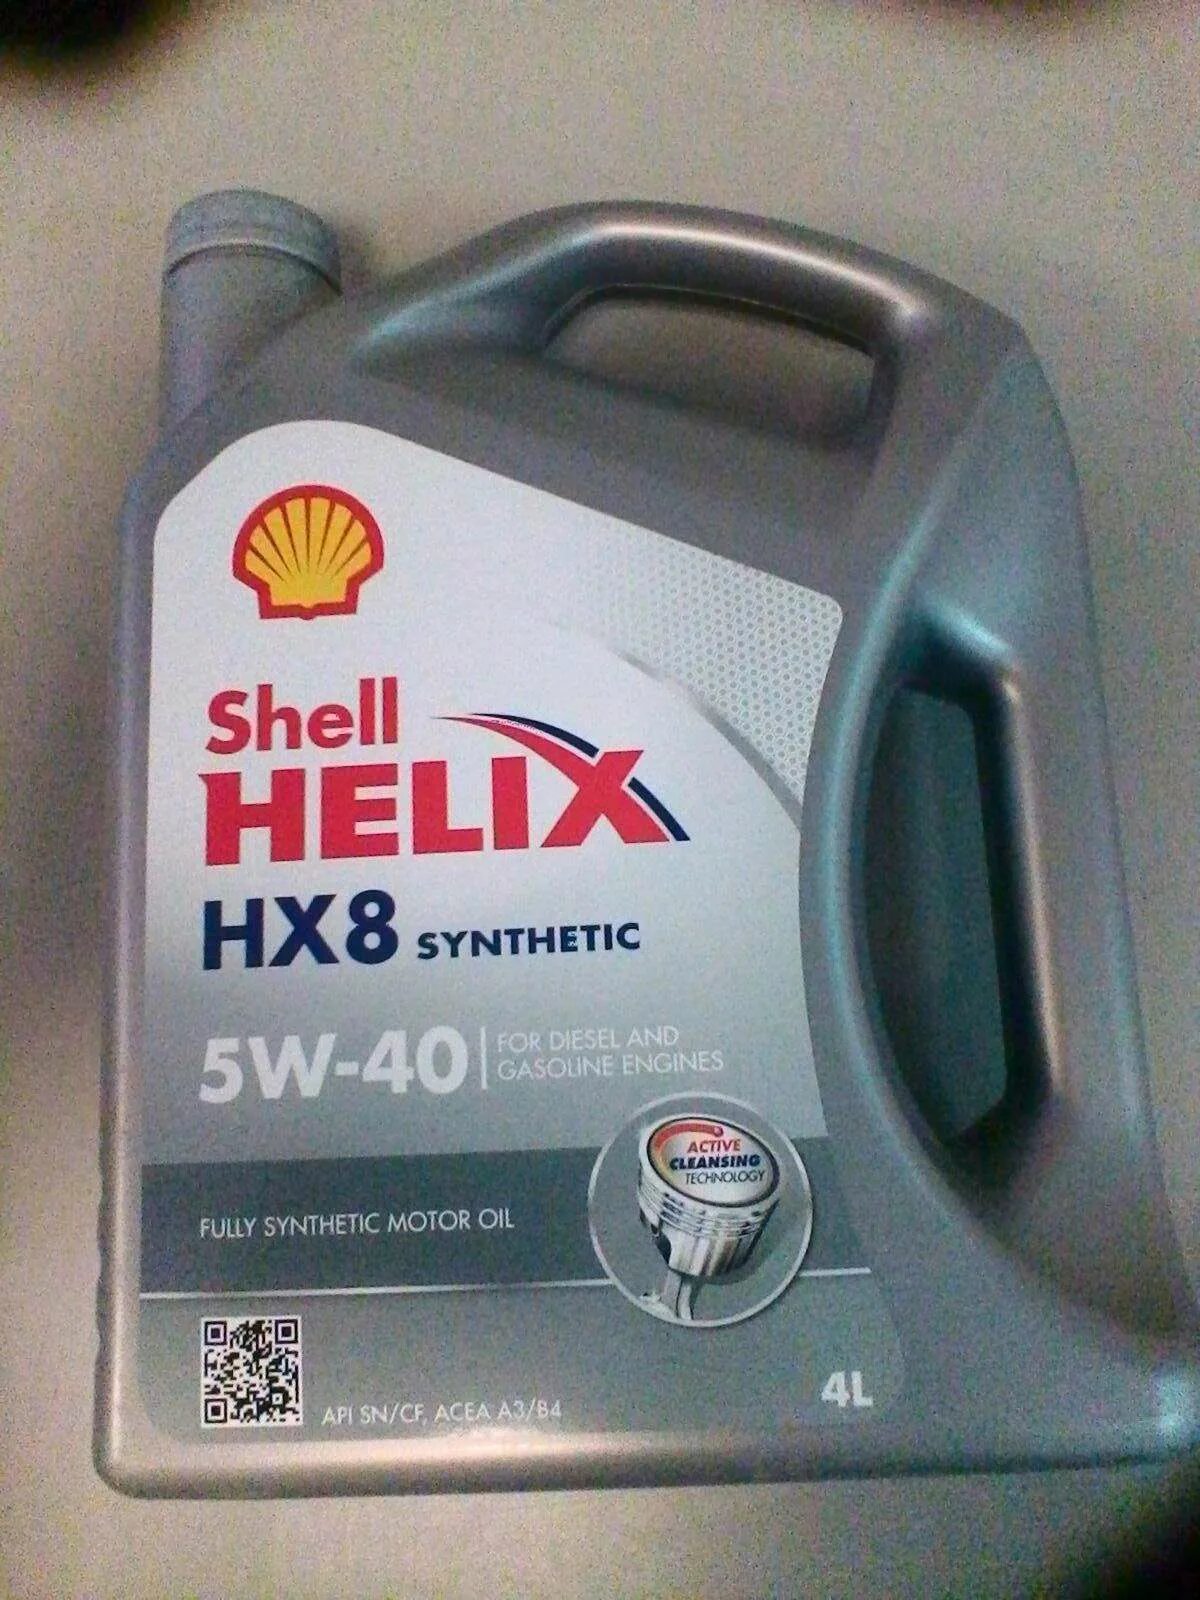 Масло моторное Shell Helix hx8. Масло моторное Shell 550040295. Шелл Хеликс 5 40 hx8. Масло шелл хеликс hx8 5w40